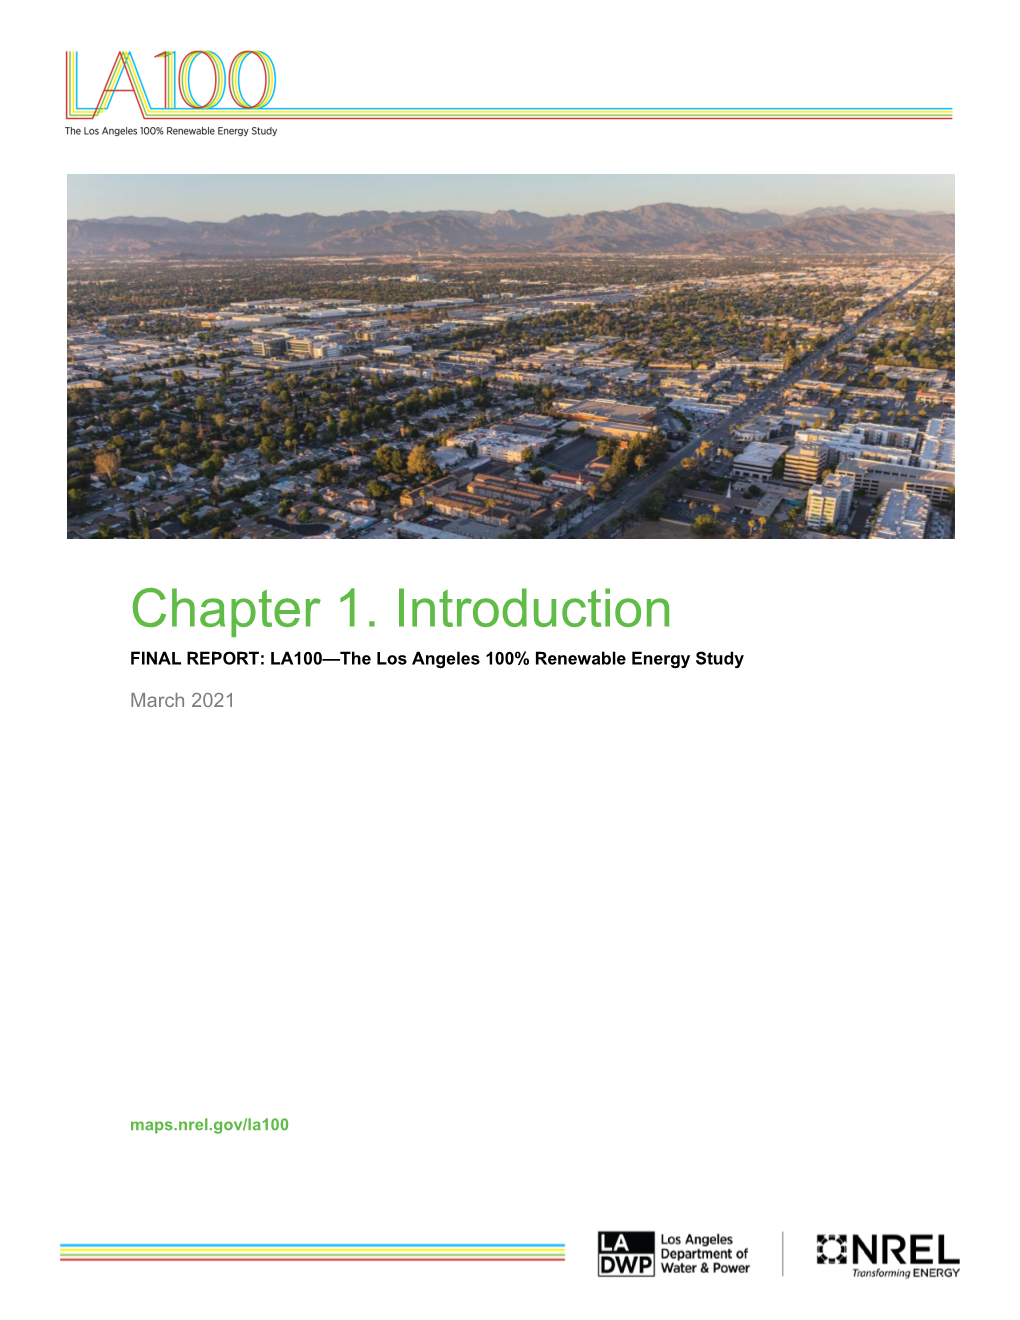 Chapter 1. Introduction FINAL REPORT: LA100—The Los Angeles 100% Renewable Energy Study